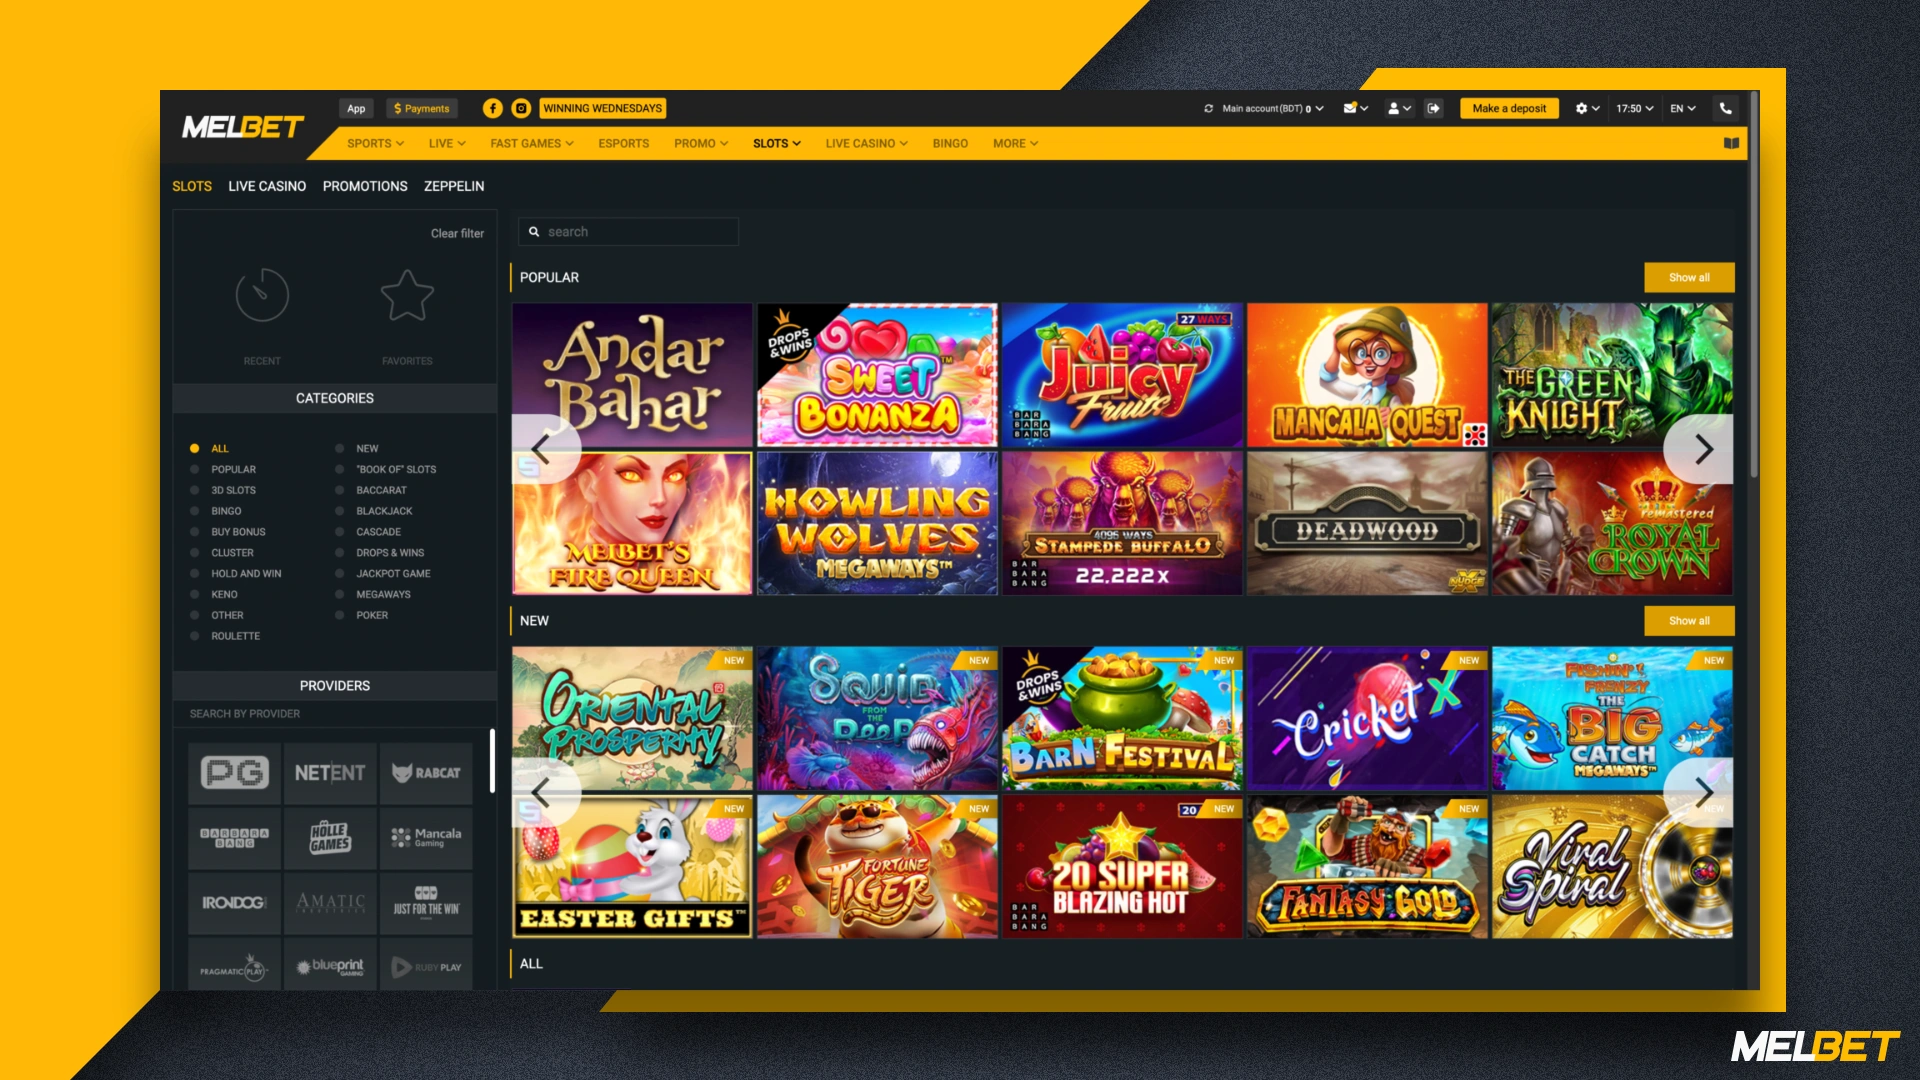 Slots are very popular among players, so the first thing we recommend to pay attention to them in the casino Melbet